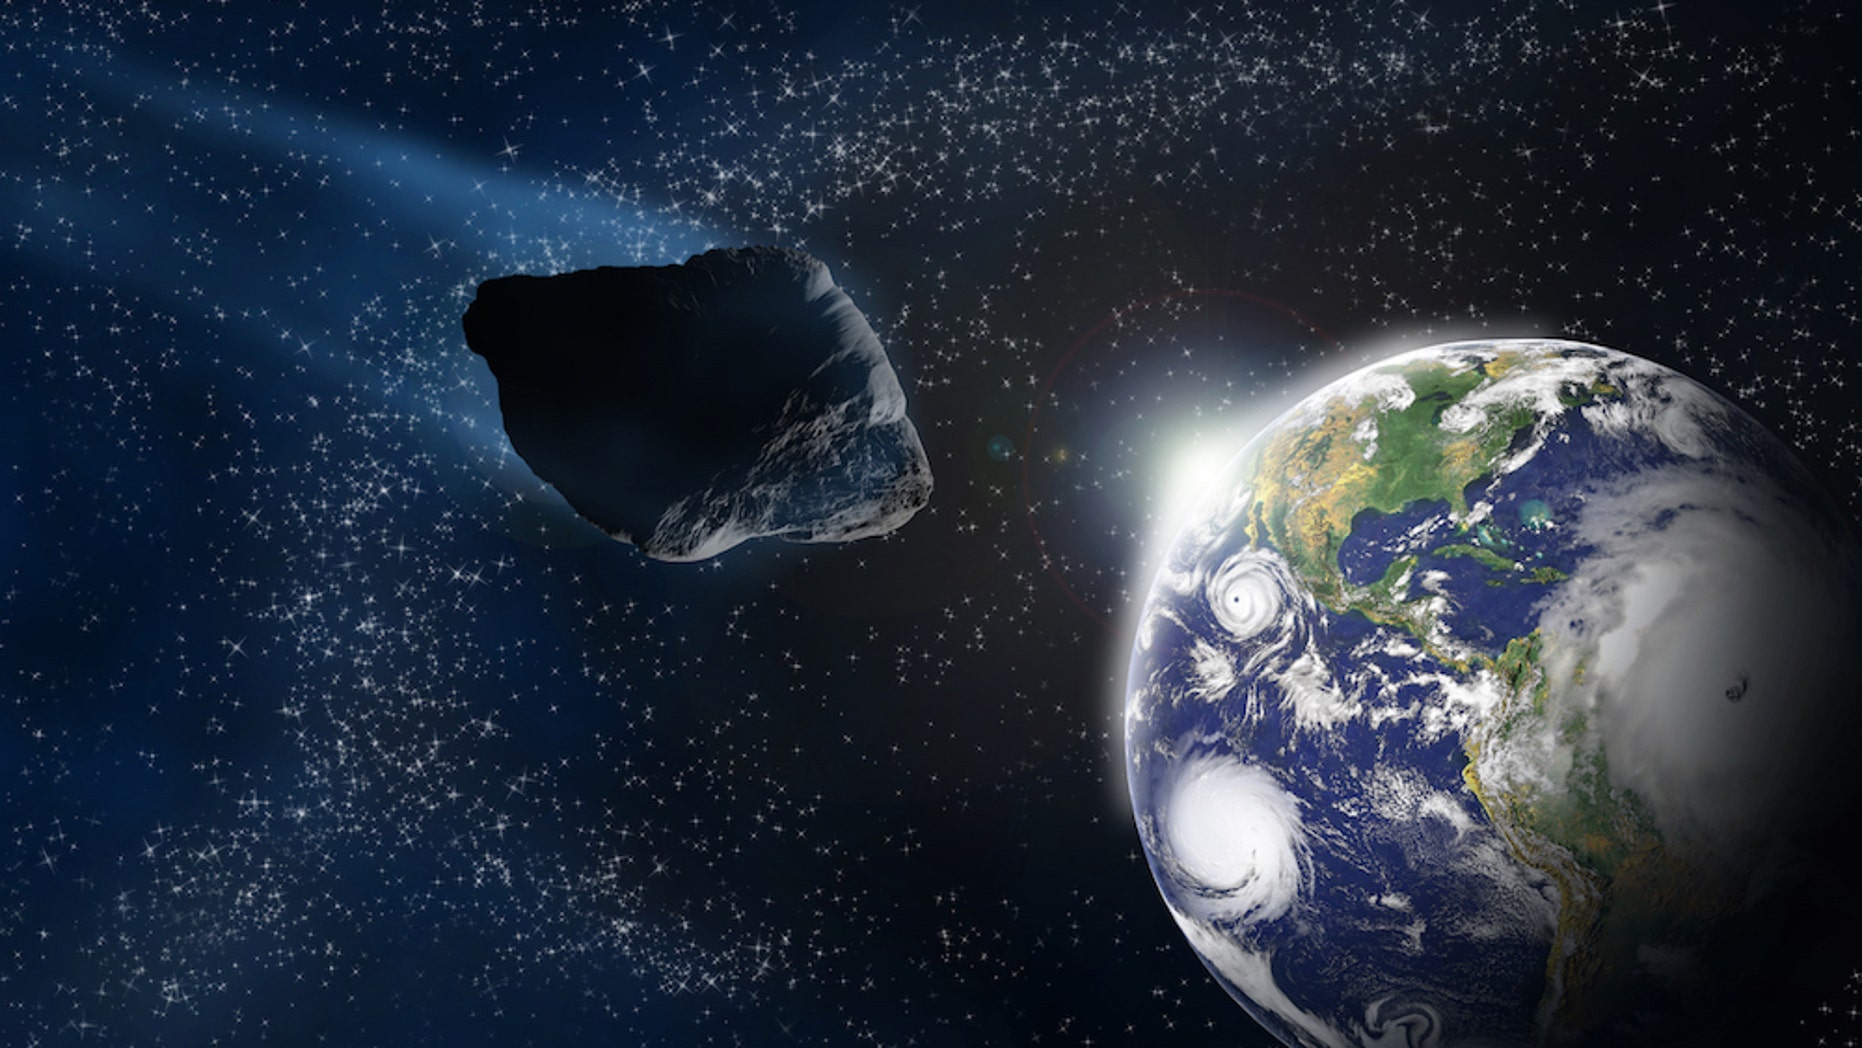 Astronomers spotted a car-size asteroid just hours before impact | Fox News